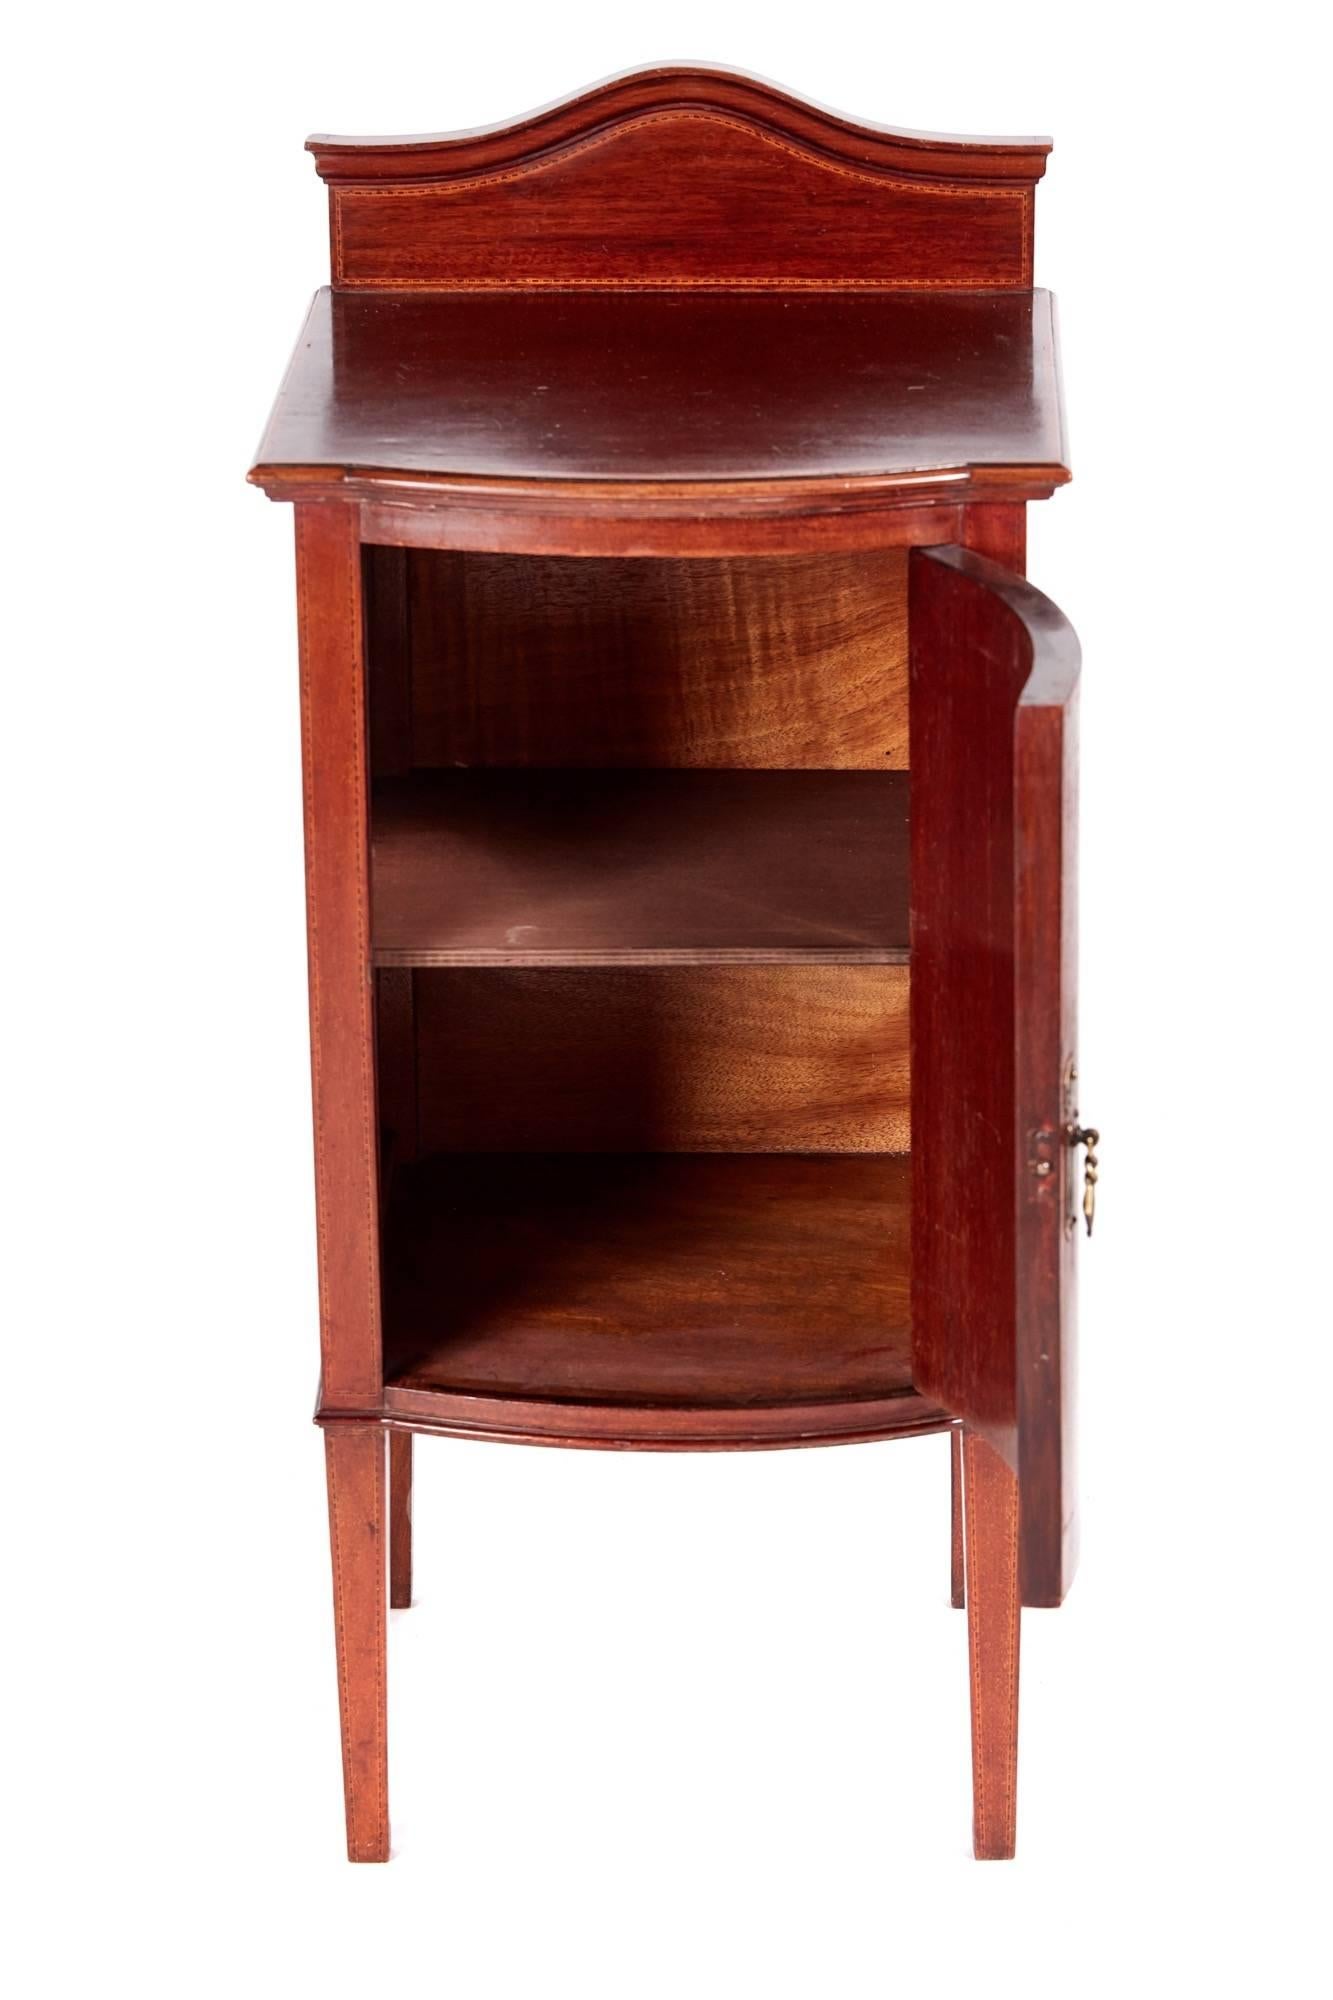 Edwardian inlaid mahogany bedside cabinet, with a shaped back, nice mahogany top, bow front door with lovely inlay, standing on square tapering legs
lovely color and condition
Measures: 16